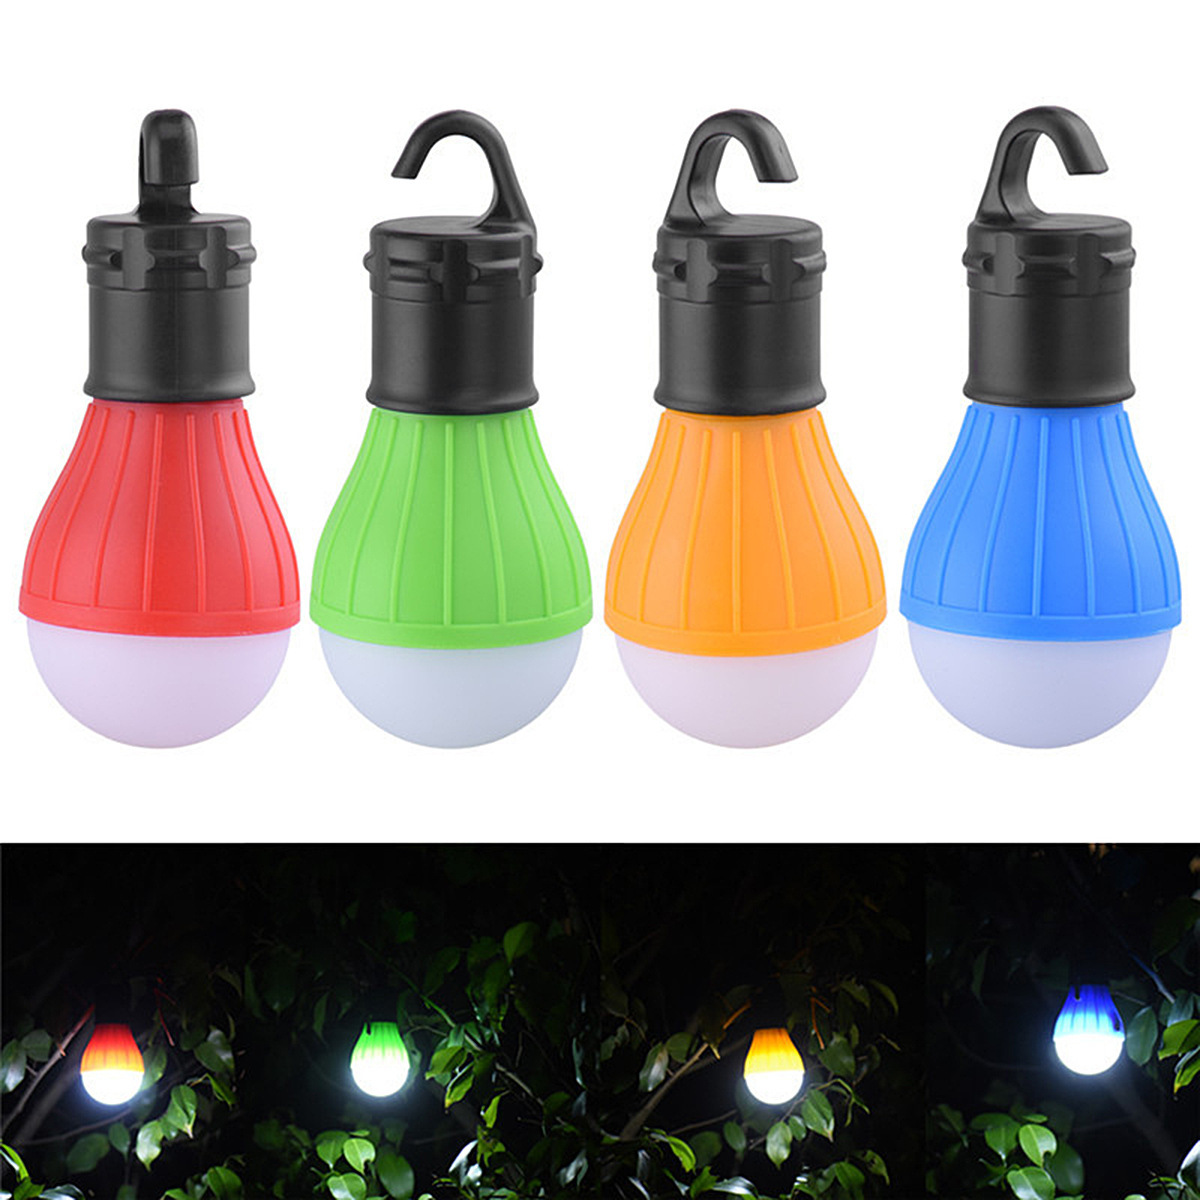 Portable Emergency Camping Light Battery Operated Tent Lights Waterproof Bulb For Hiking Fishing Outdoor